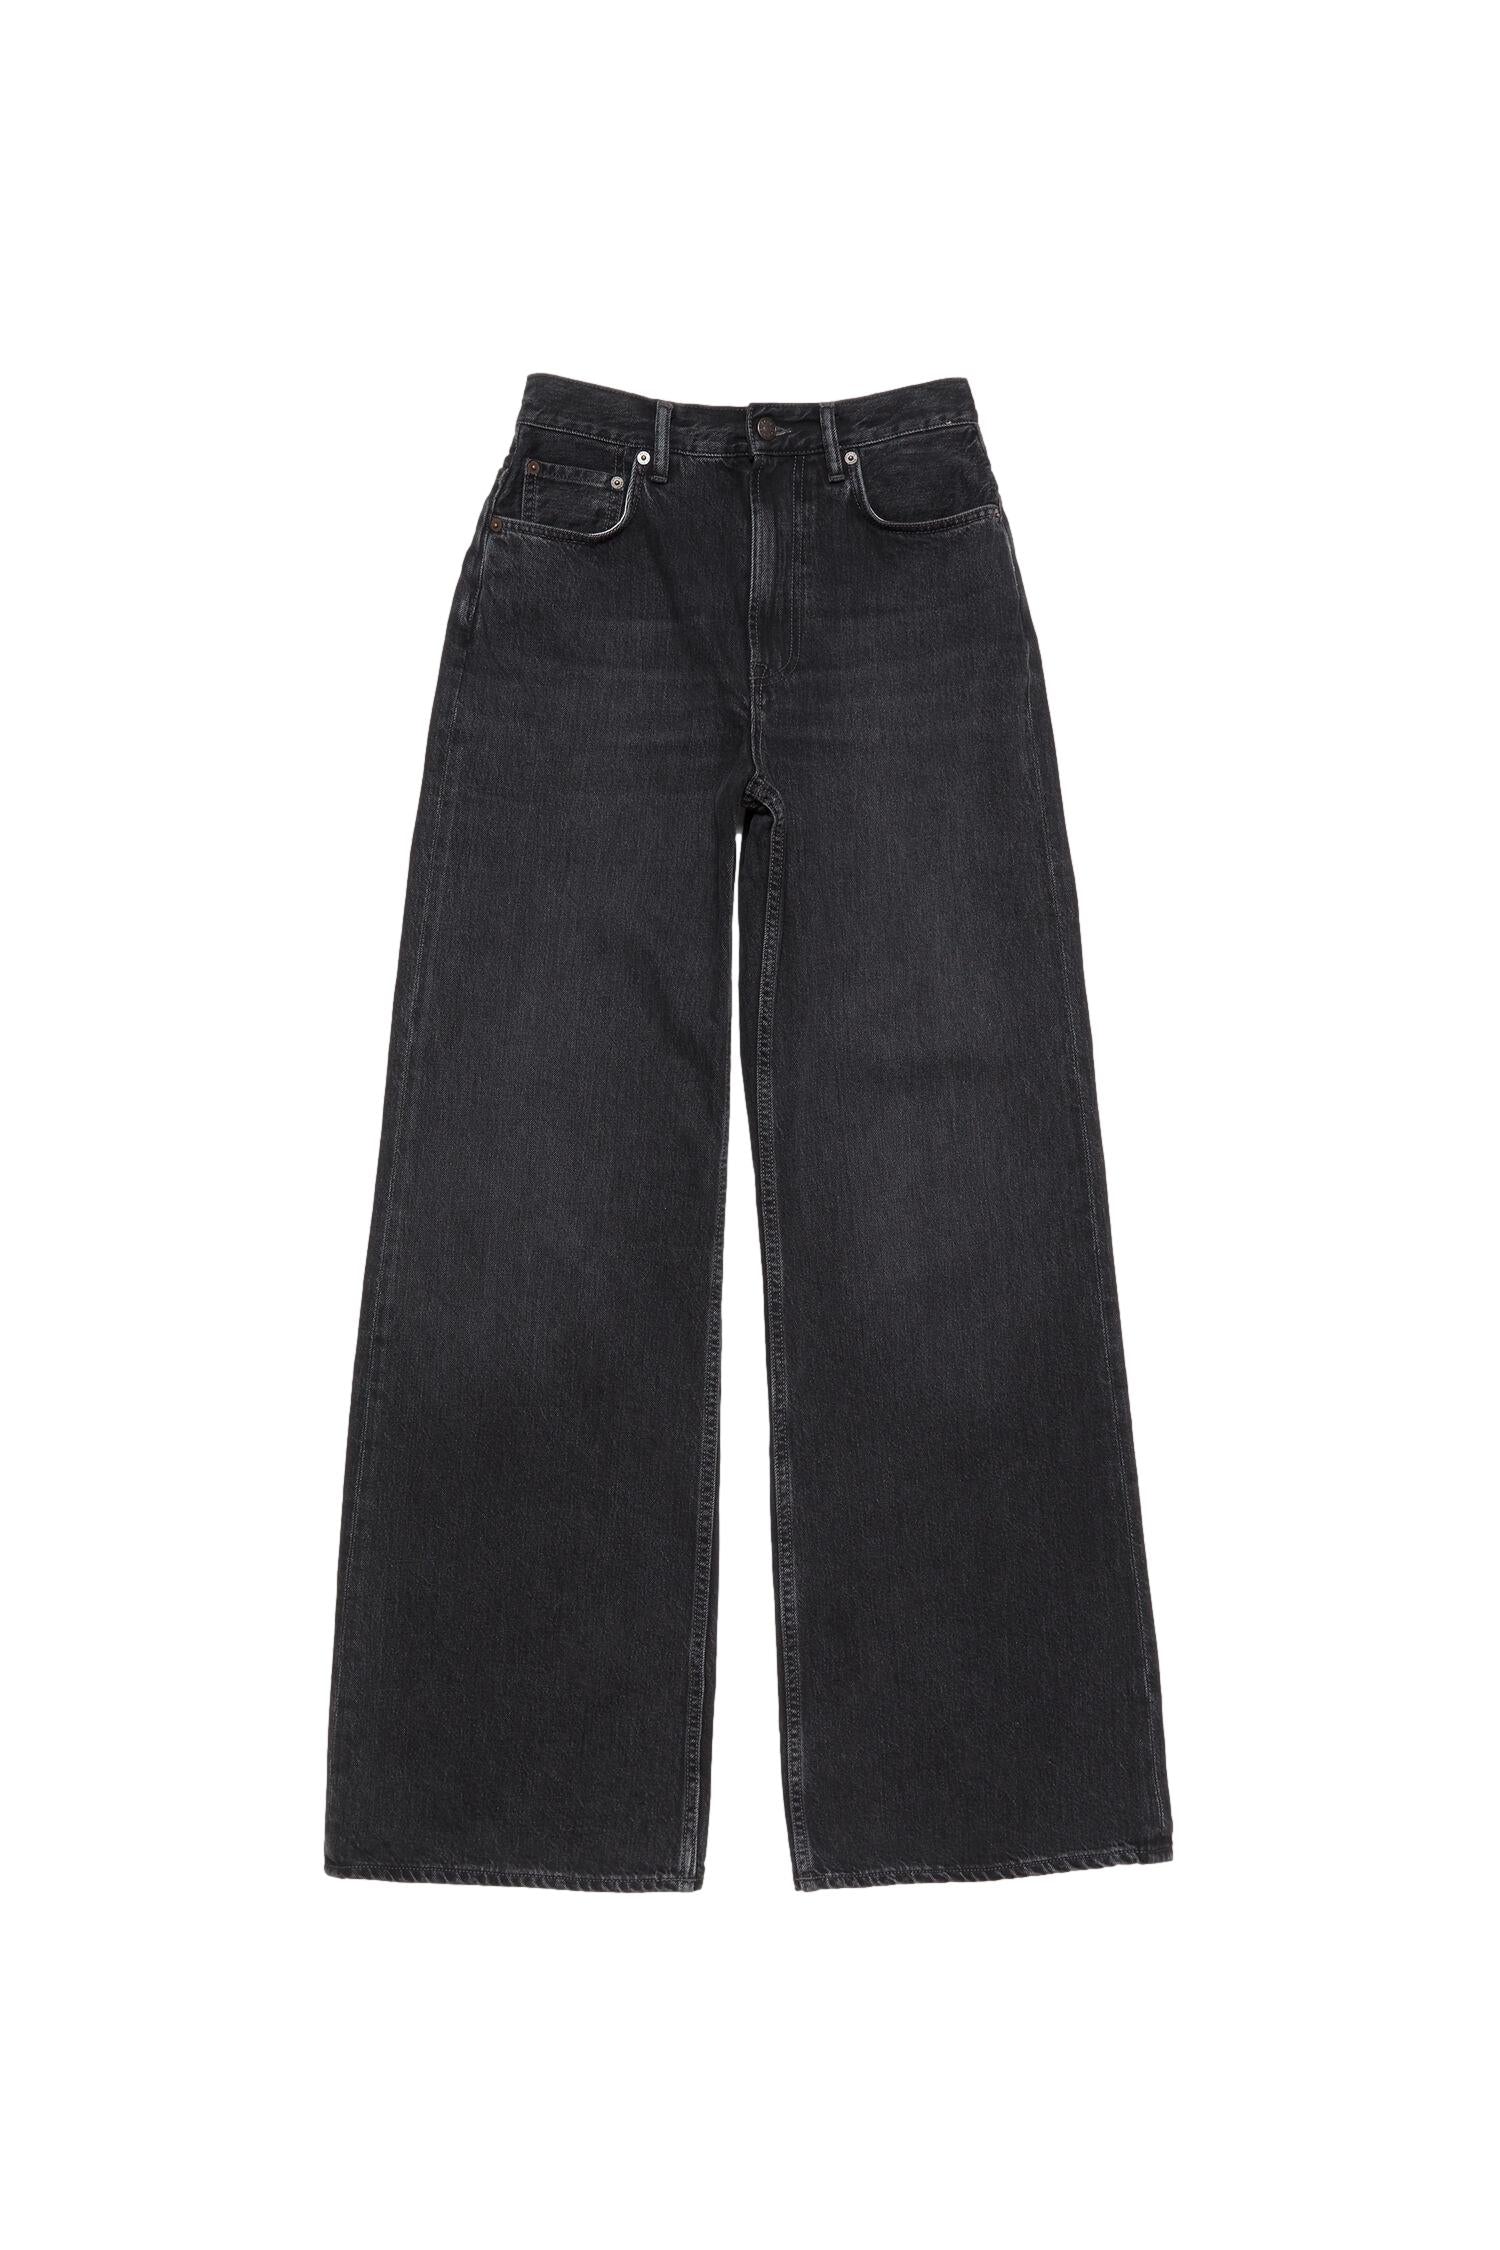 Acne Relaxed Fit Jeans - 2022F Jeans Vasket Sort